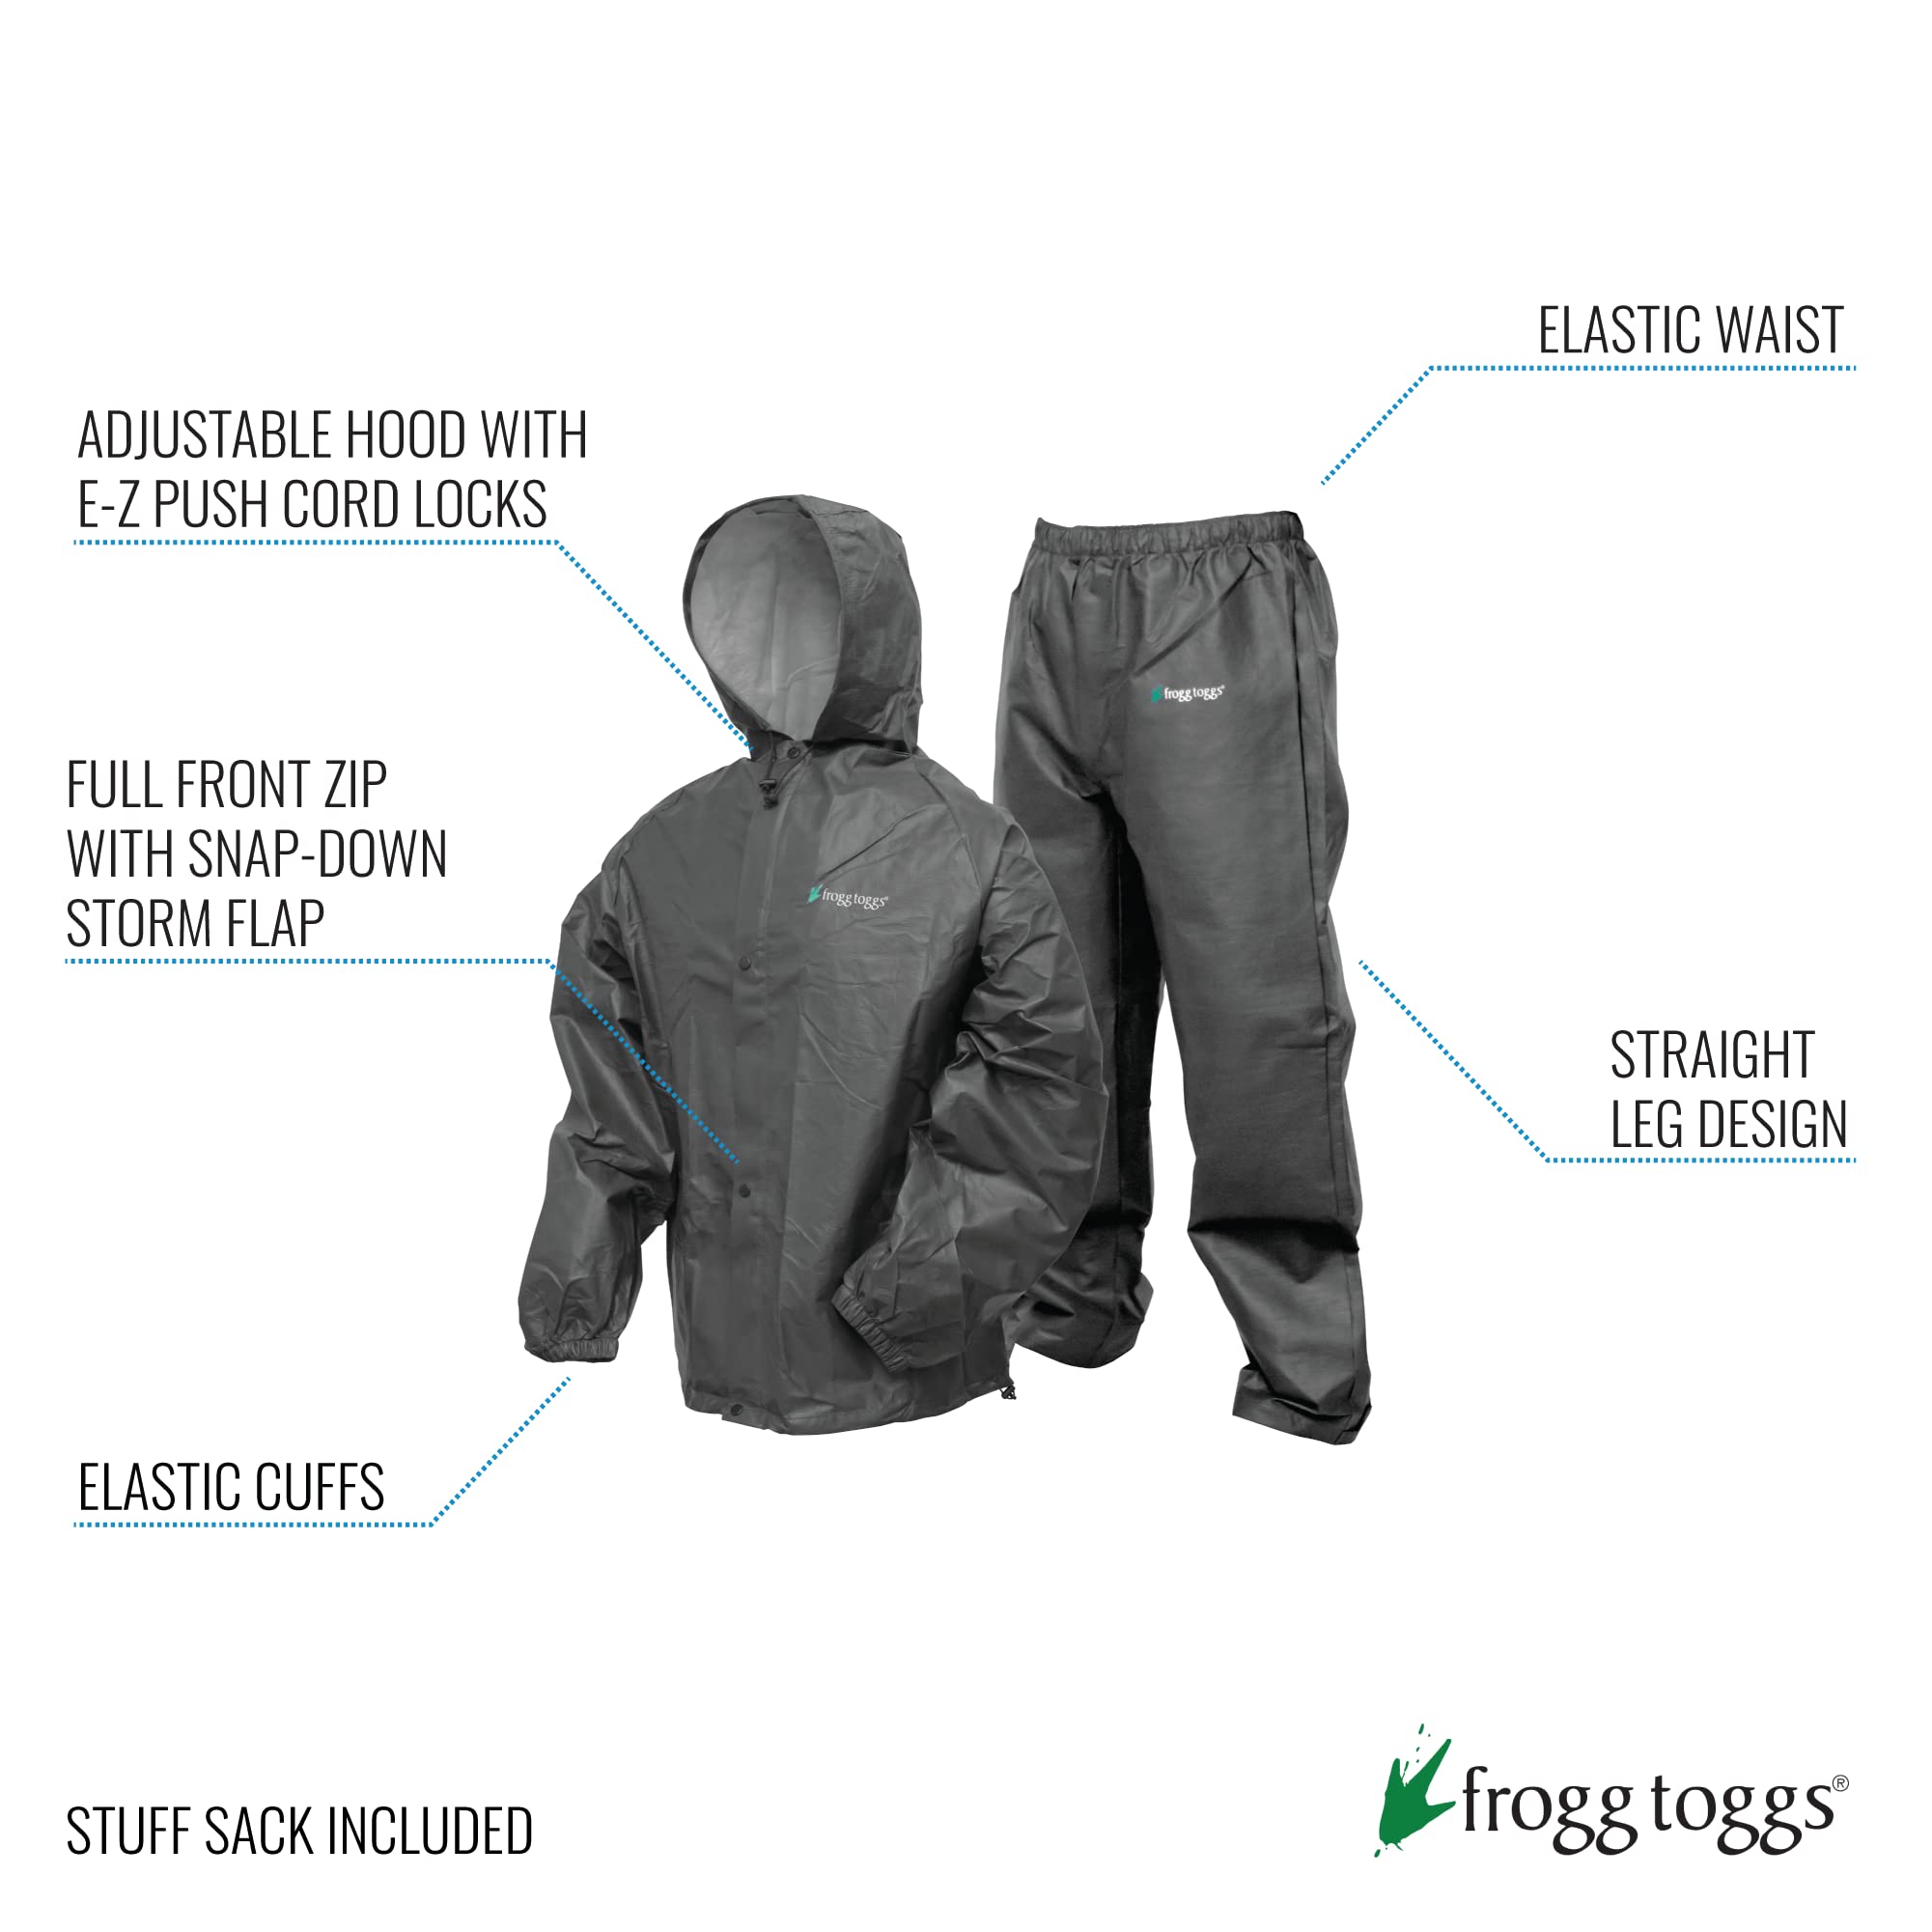 FROGG TOGGS Men's Pro Lite Suit, Waterproof, Breathable, Dependable Wet Weather Protection